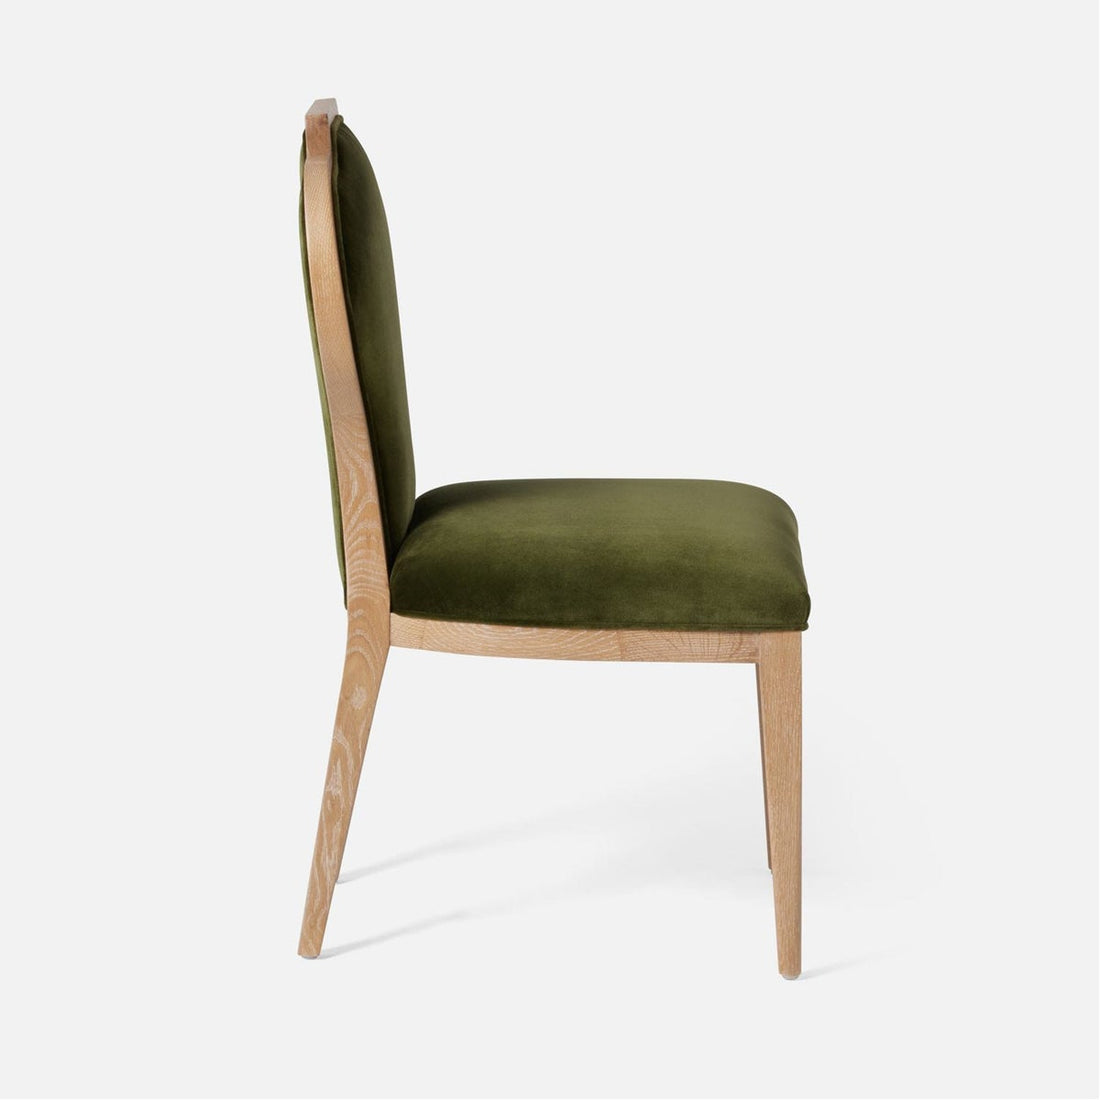 Made Goods Joanna Dining Chair in Rhone Leather